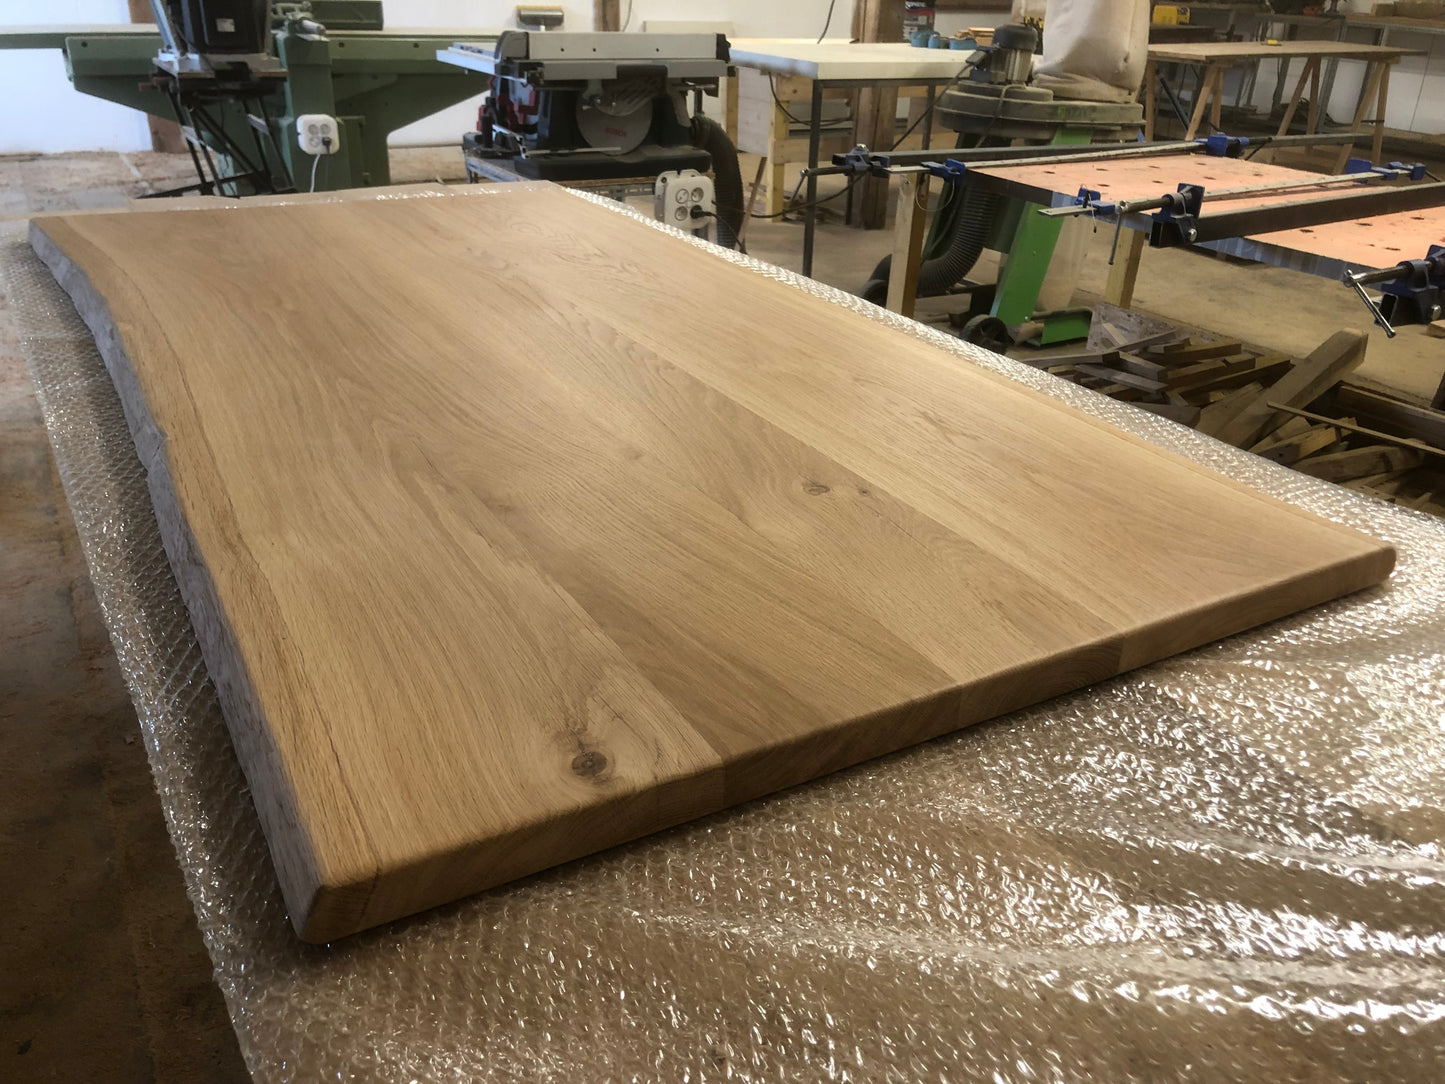 Oak top 4 cm thick - Natural edges - Rounded edges - Varnish (coffee/side tables) 